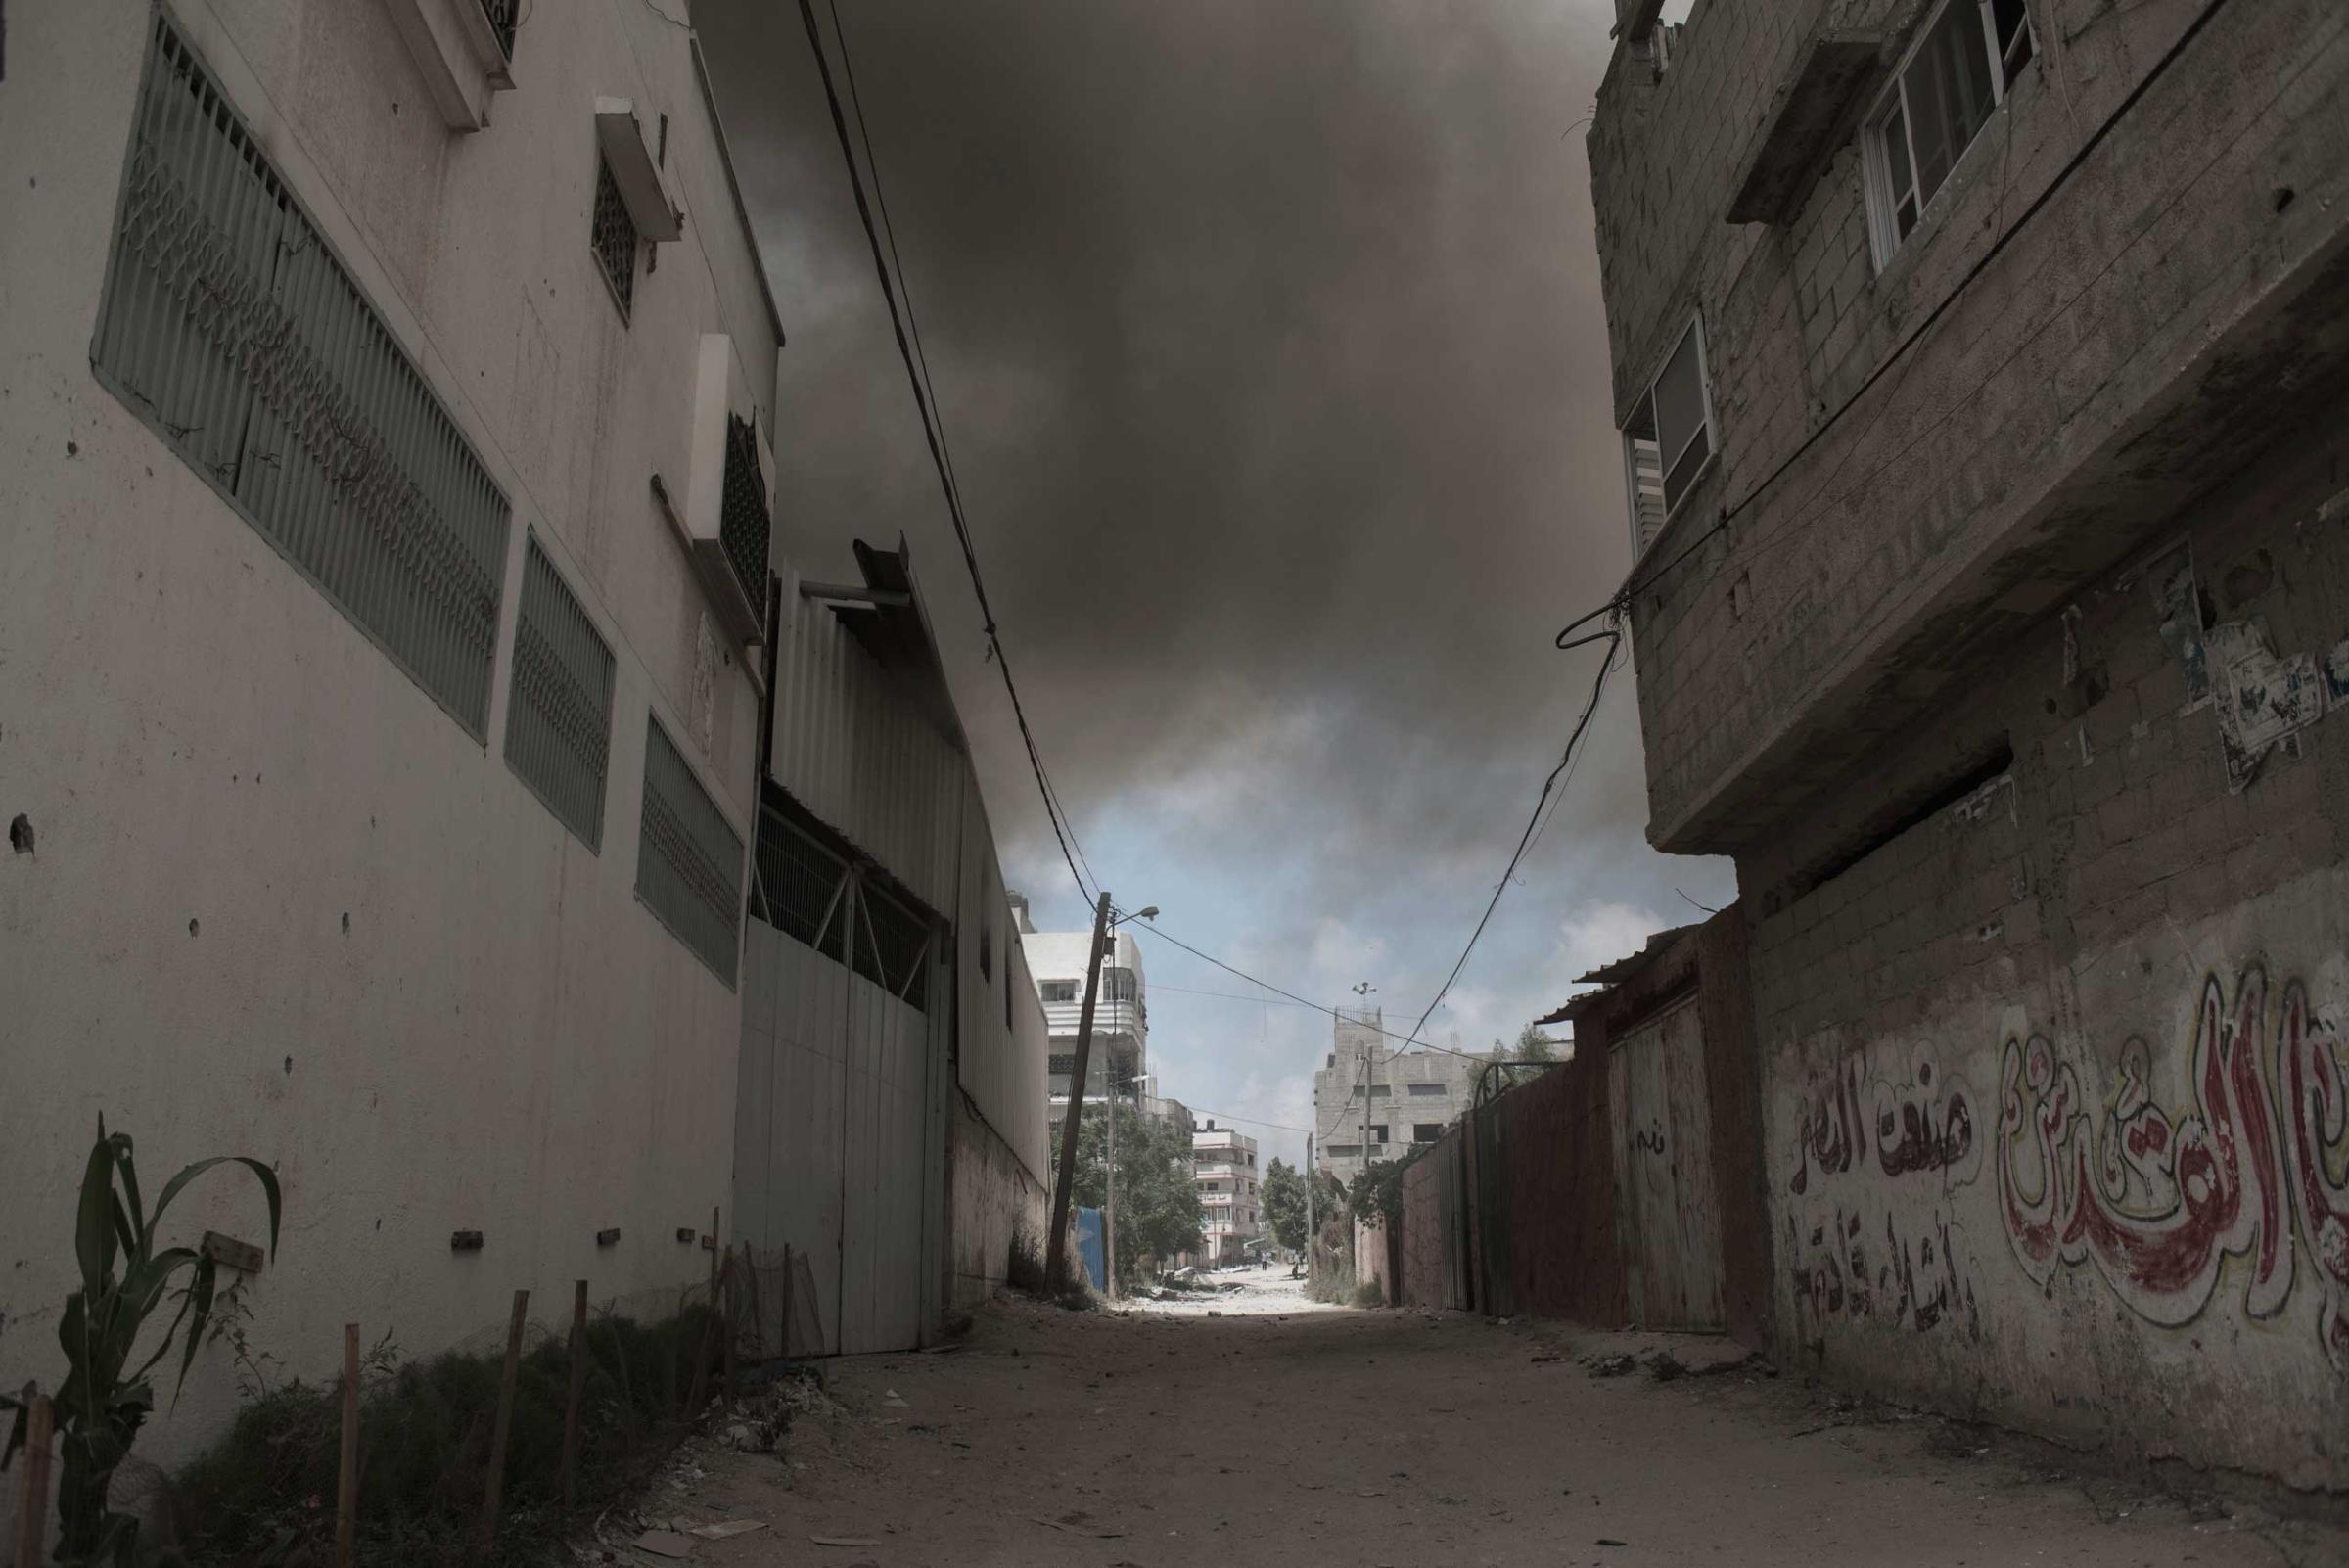 Following a heavy Israeli attack by shelling and airstrikes, smoke is seen in the Shejaiya district of Gaza City during a humanitarian cease-fire, July 20, 2014.